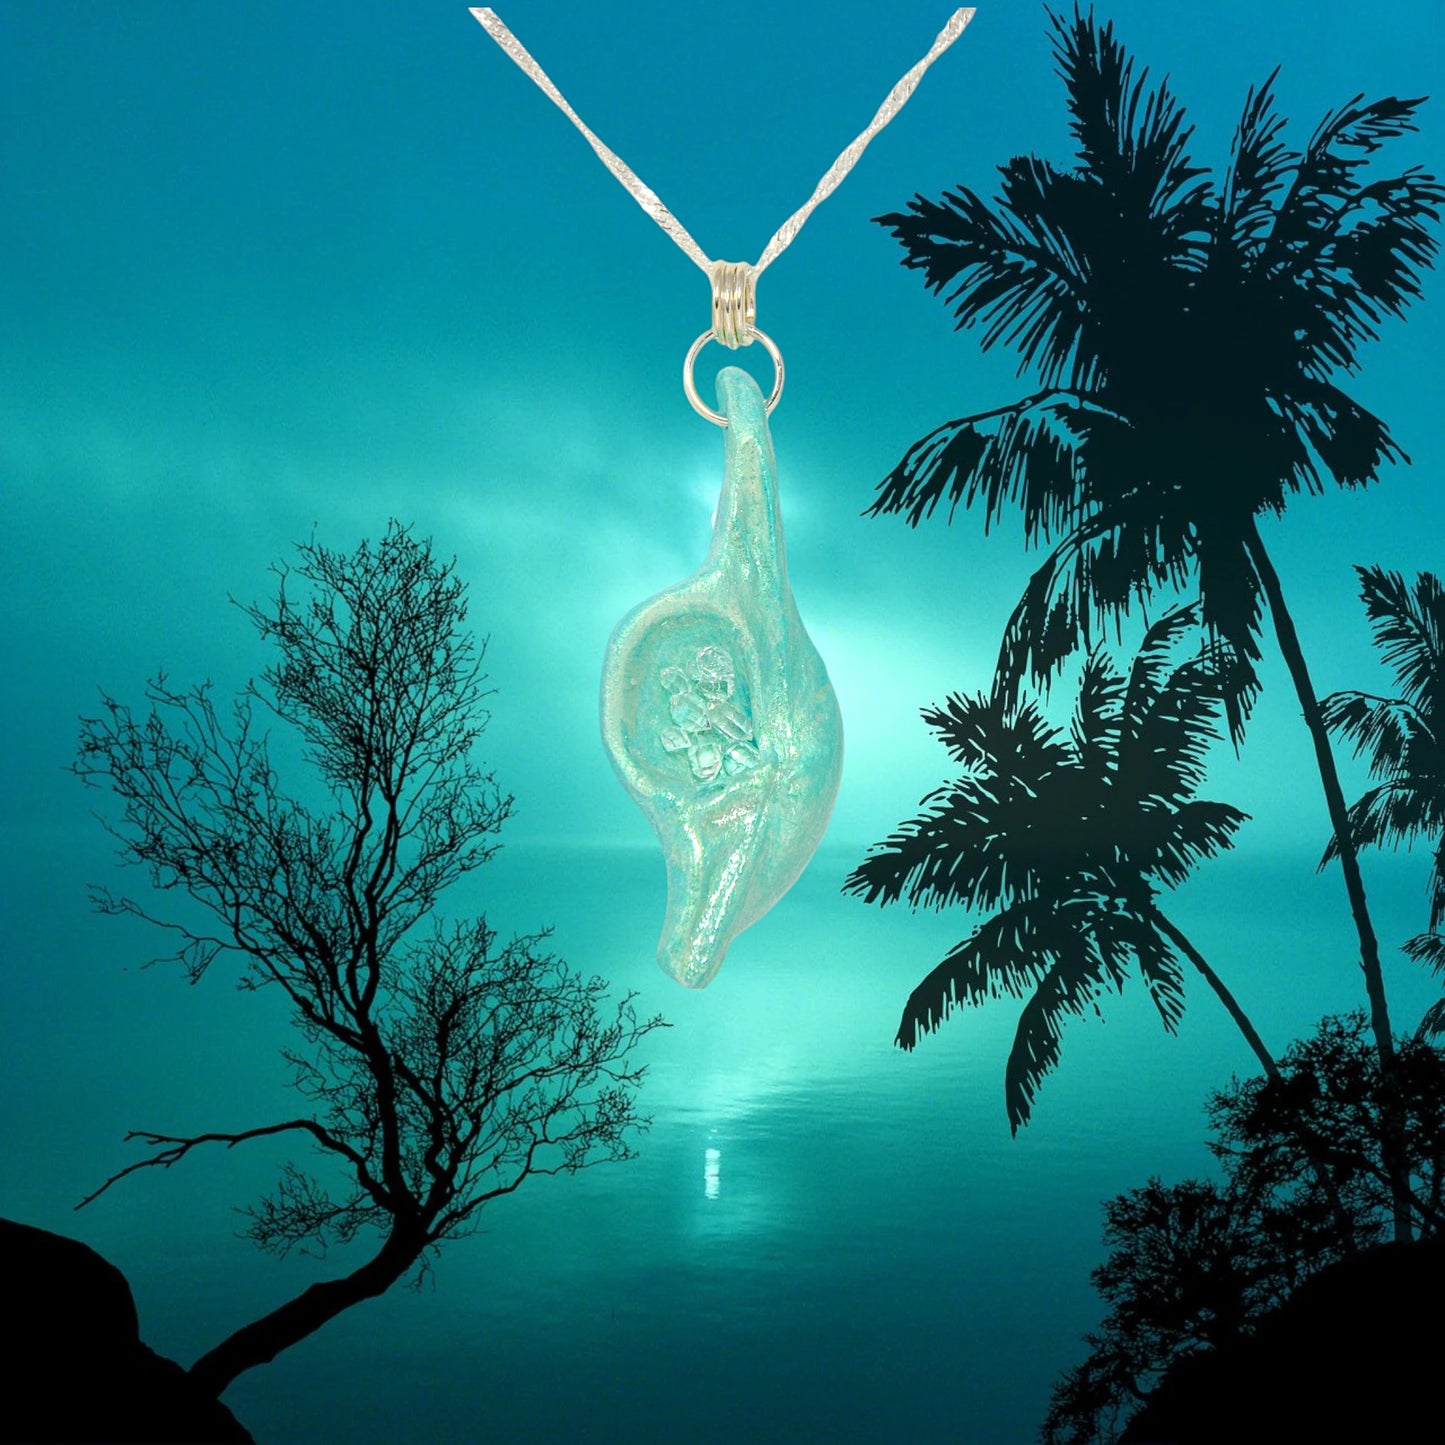 Diamond Mine Pendant is named for the eight herkimer diamonds that enhance the beauty of this gorgeous pendant!  The pendant is shown hanging from a chain over a moon lit ocean with trees around.